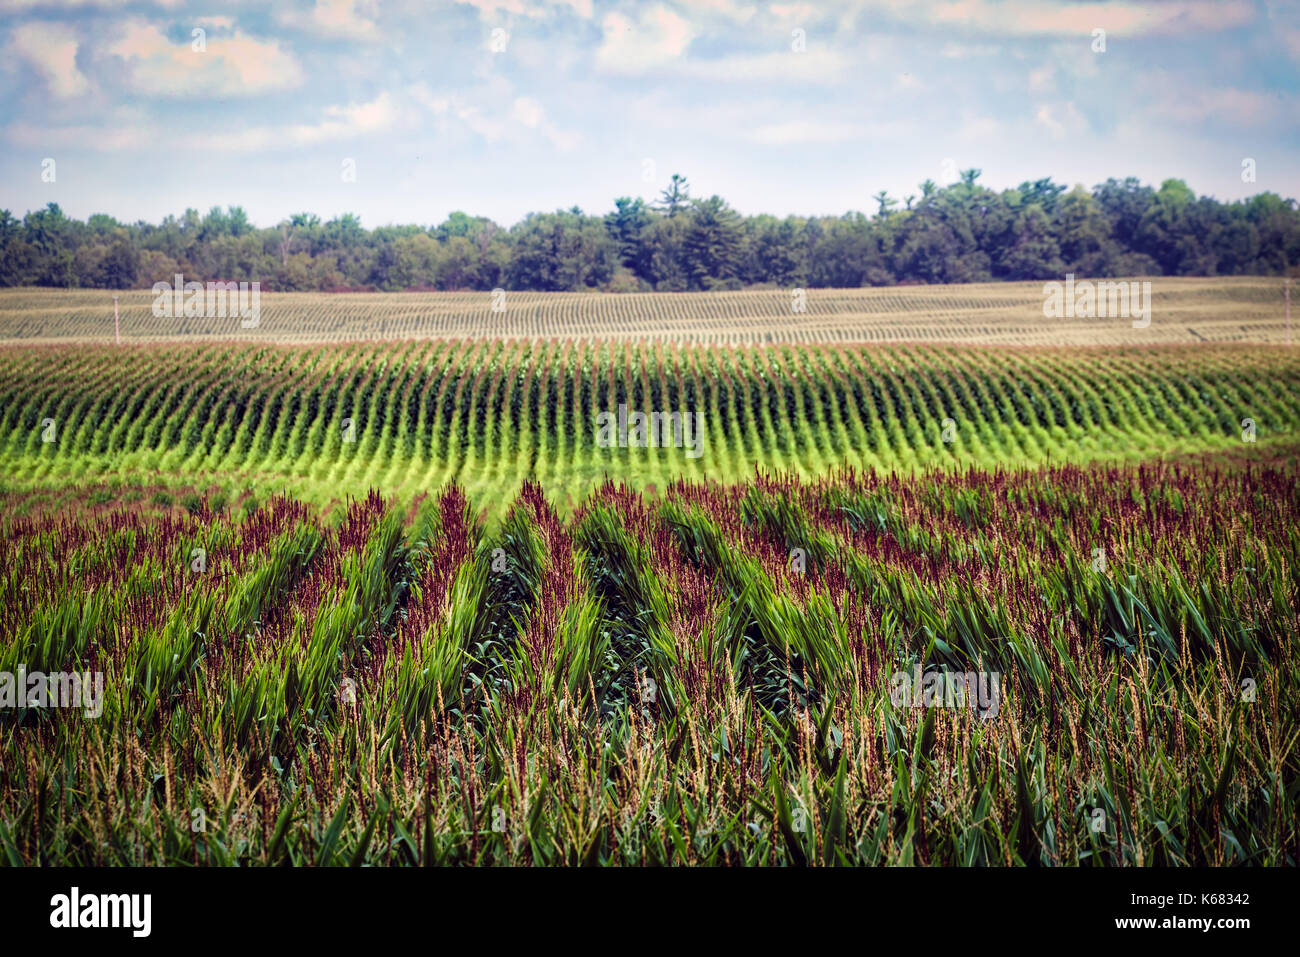 Rows of corn in a midwest field near Manitowoc, Wisconsin. Stock Photo